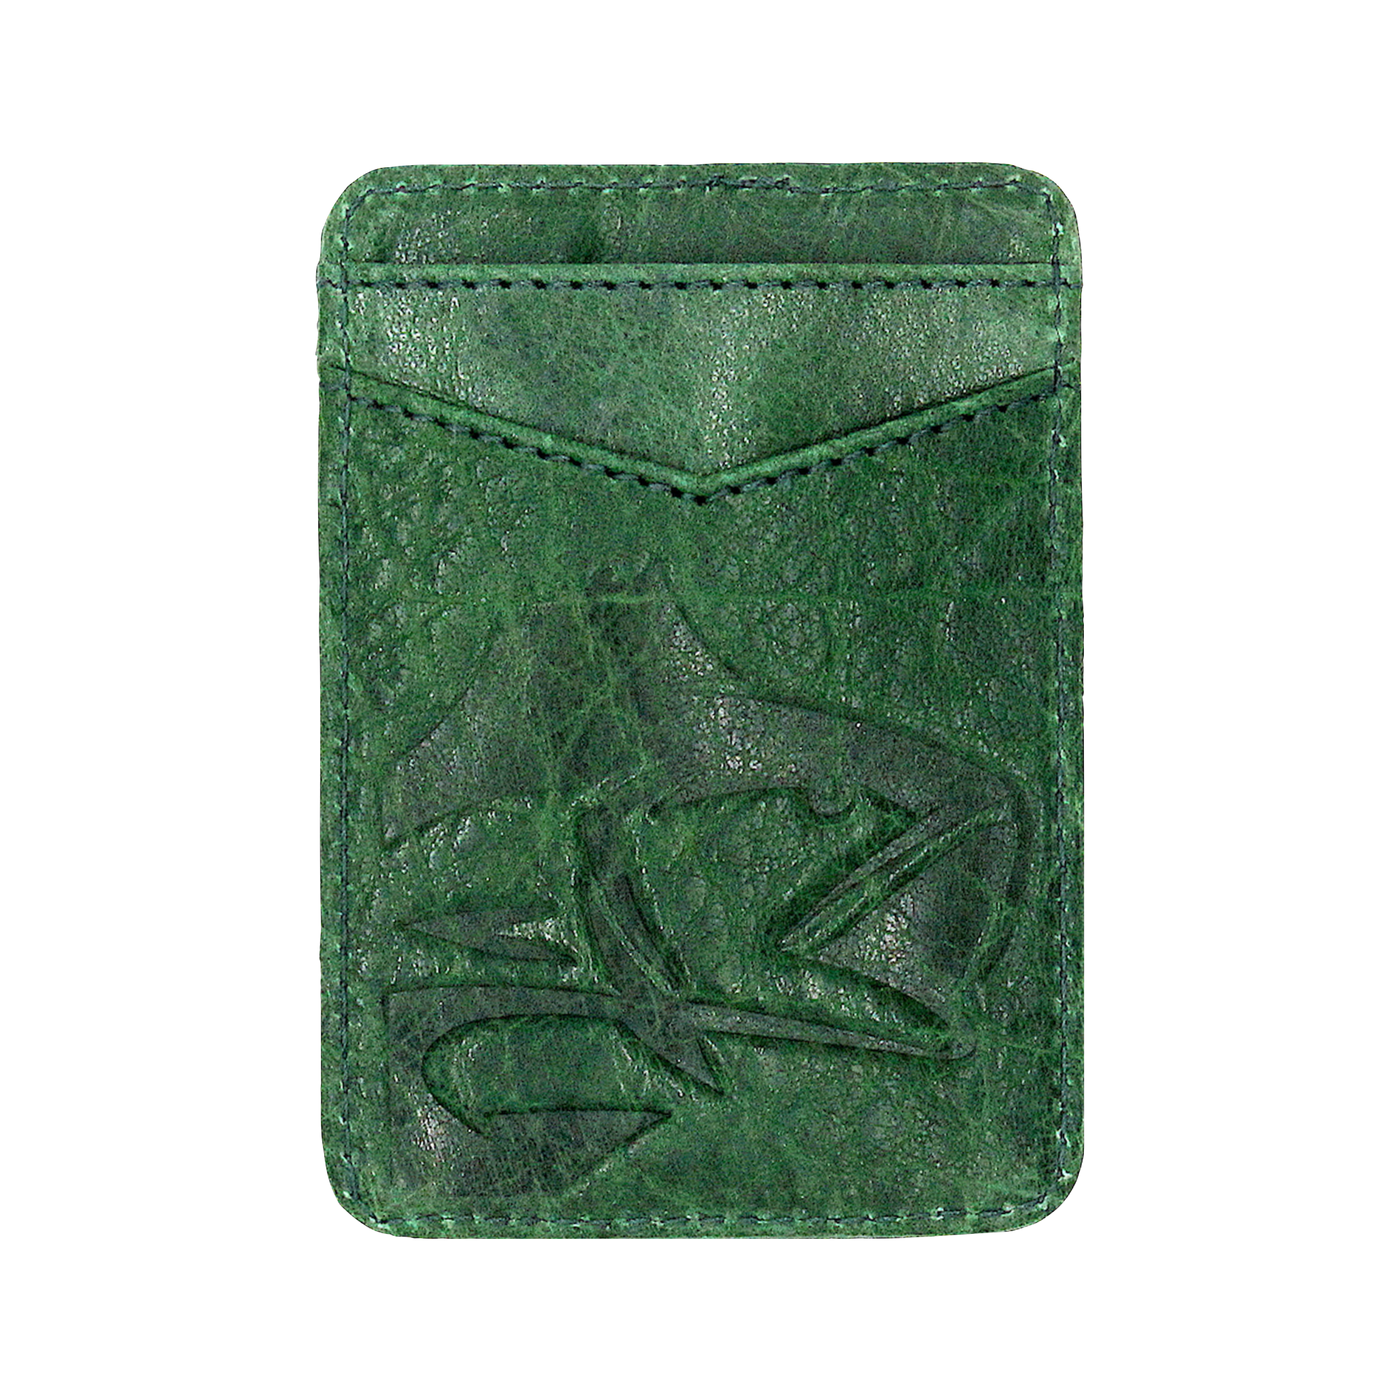 The Pursuit Front Pocket Bass Money Clip is a great minimalist wallet with premier full grain leather, bold & stylish hand-dyed color along with a debossed bass logo with a magnetic clip. Perfect for your fisher! 2 Card Slots Strong Magnetic Closure | Holds 10+ Bills Sleek, Modern Design Dimensions: 4"L x 2.8"H RFID Protection Color: Moss